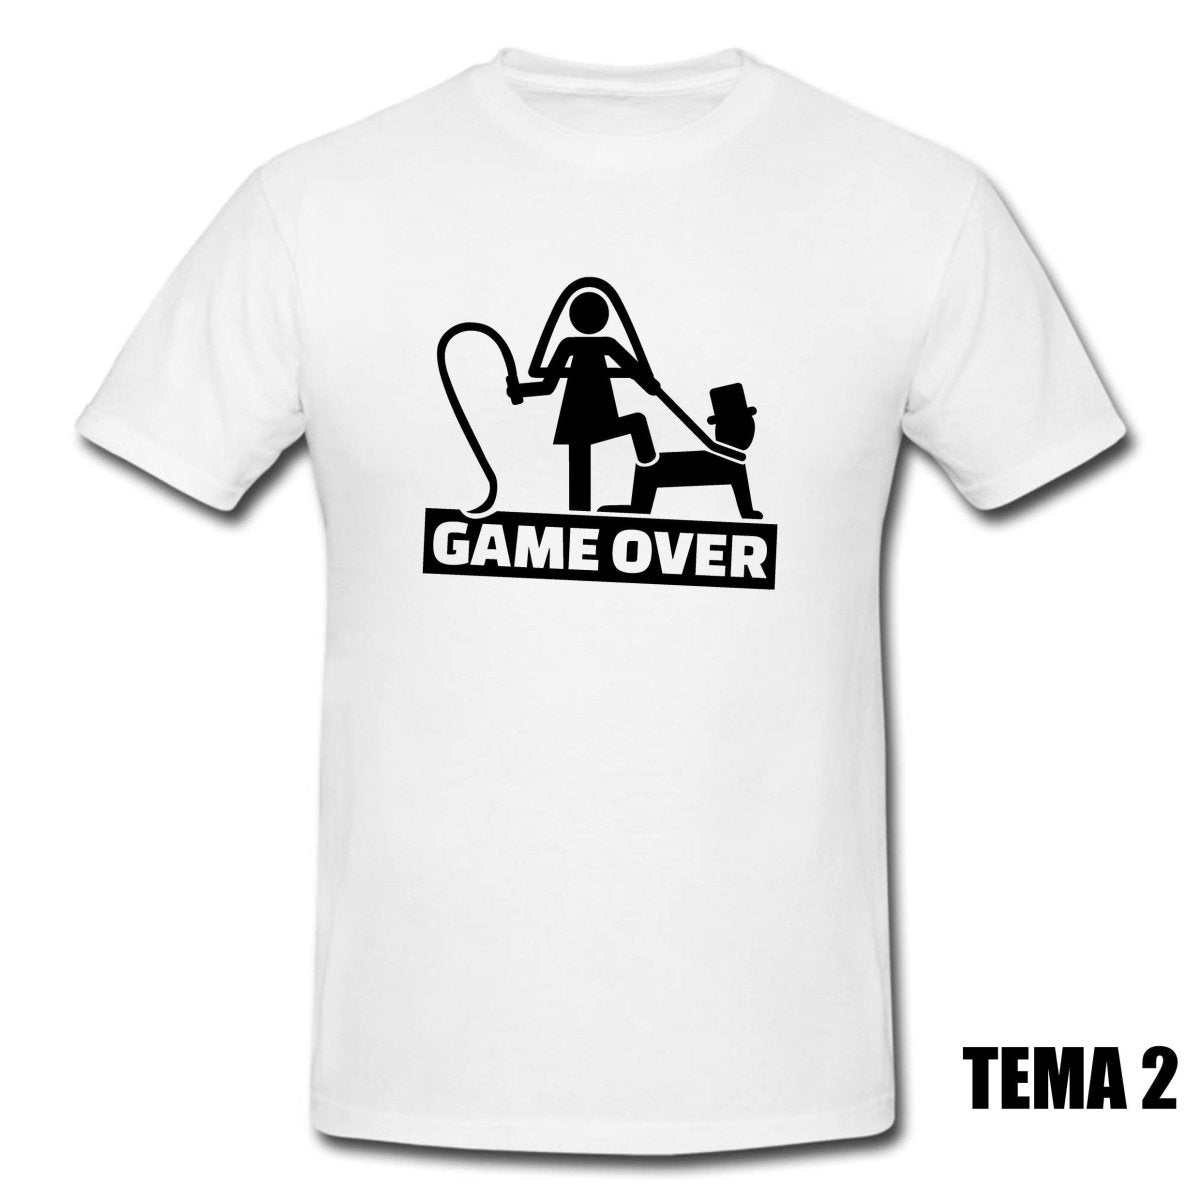 Tshirts - GAME OVER RMCLICK